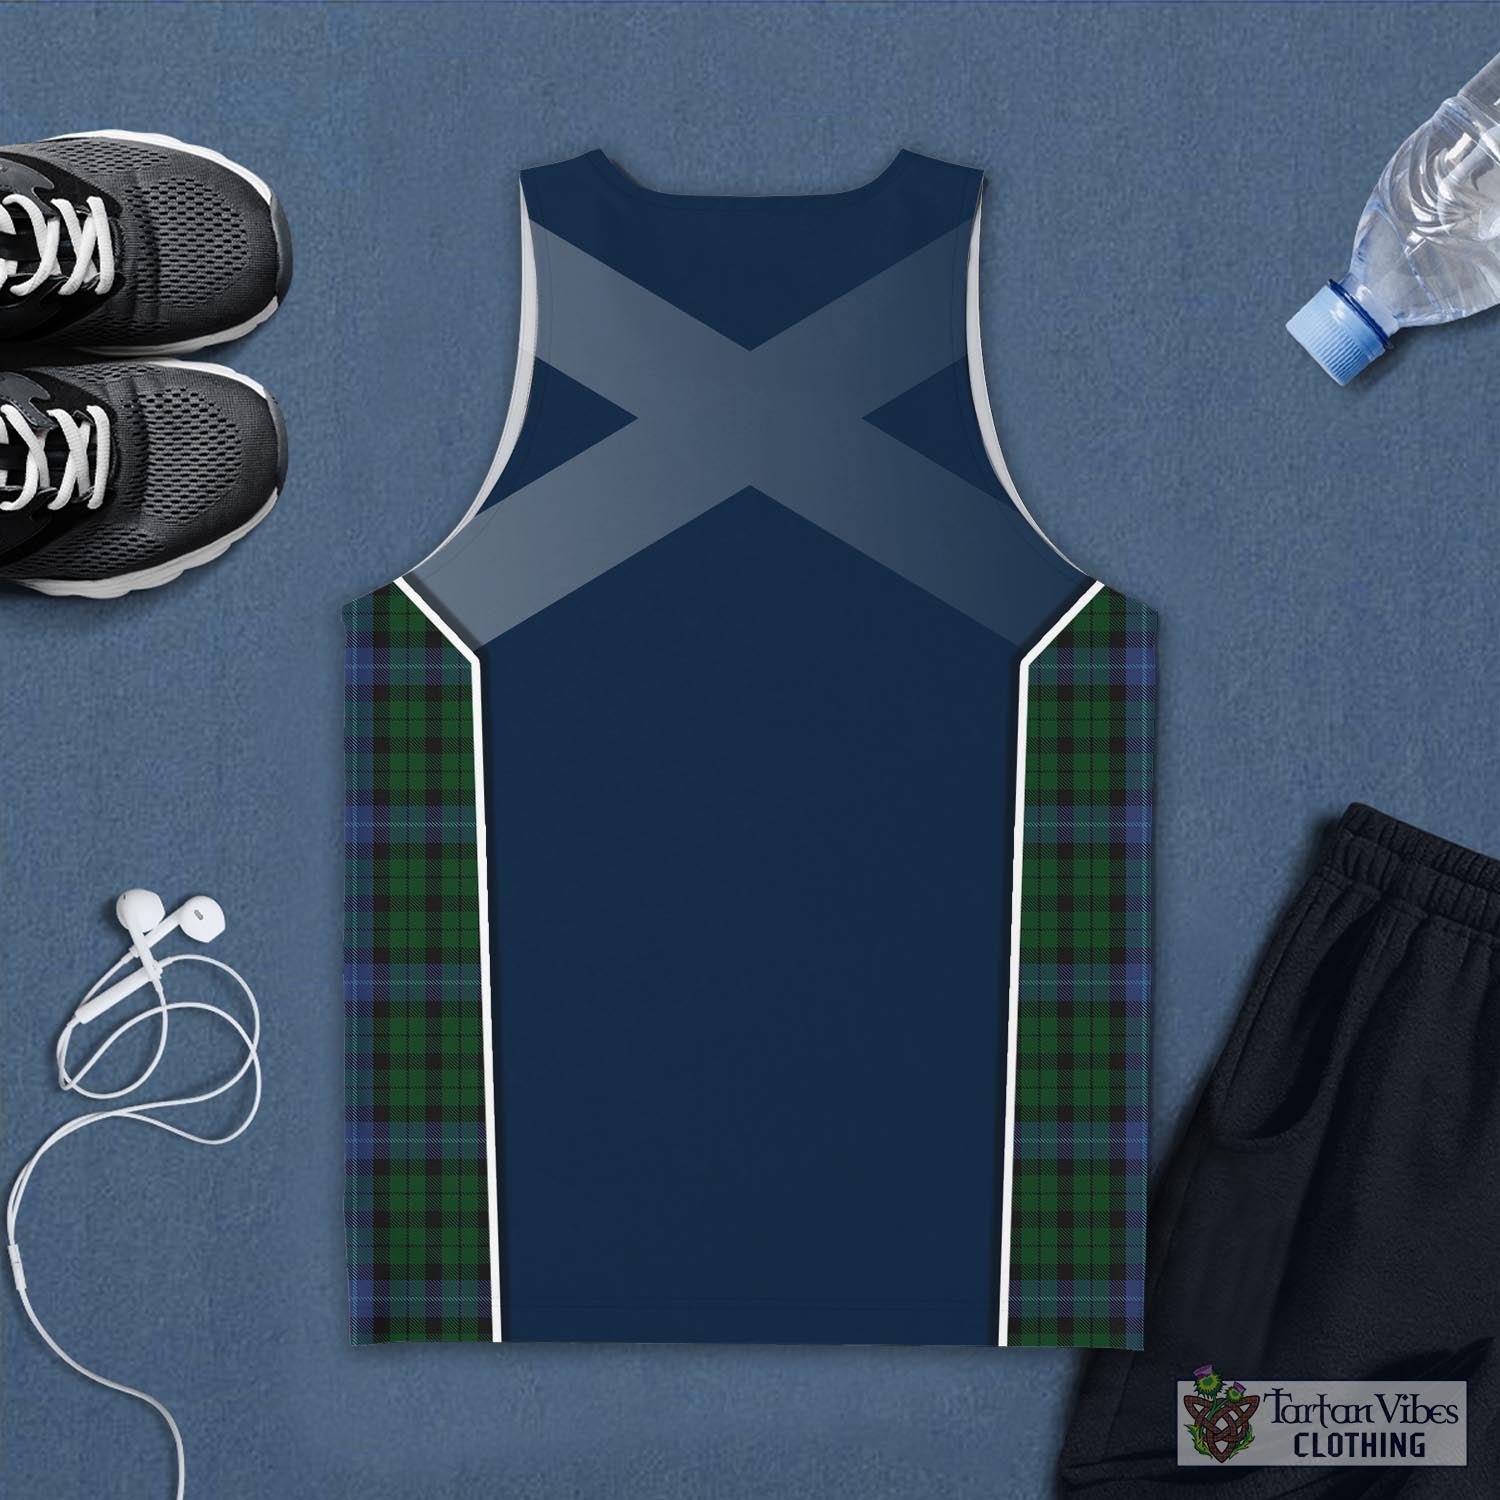 Tartan Vibes Clothing MacIntyre Tartan Men's Tanks Top with Family Crest and Scottish Thistle Vibes Sport Style